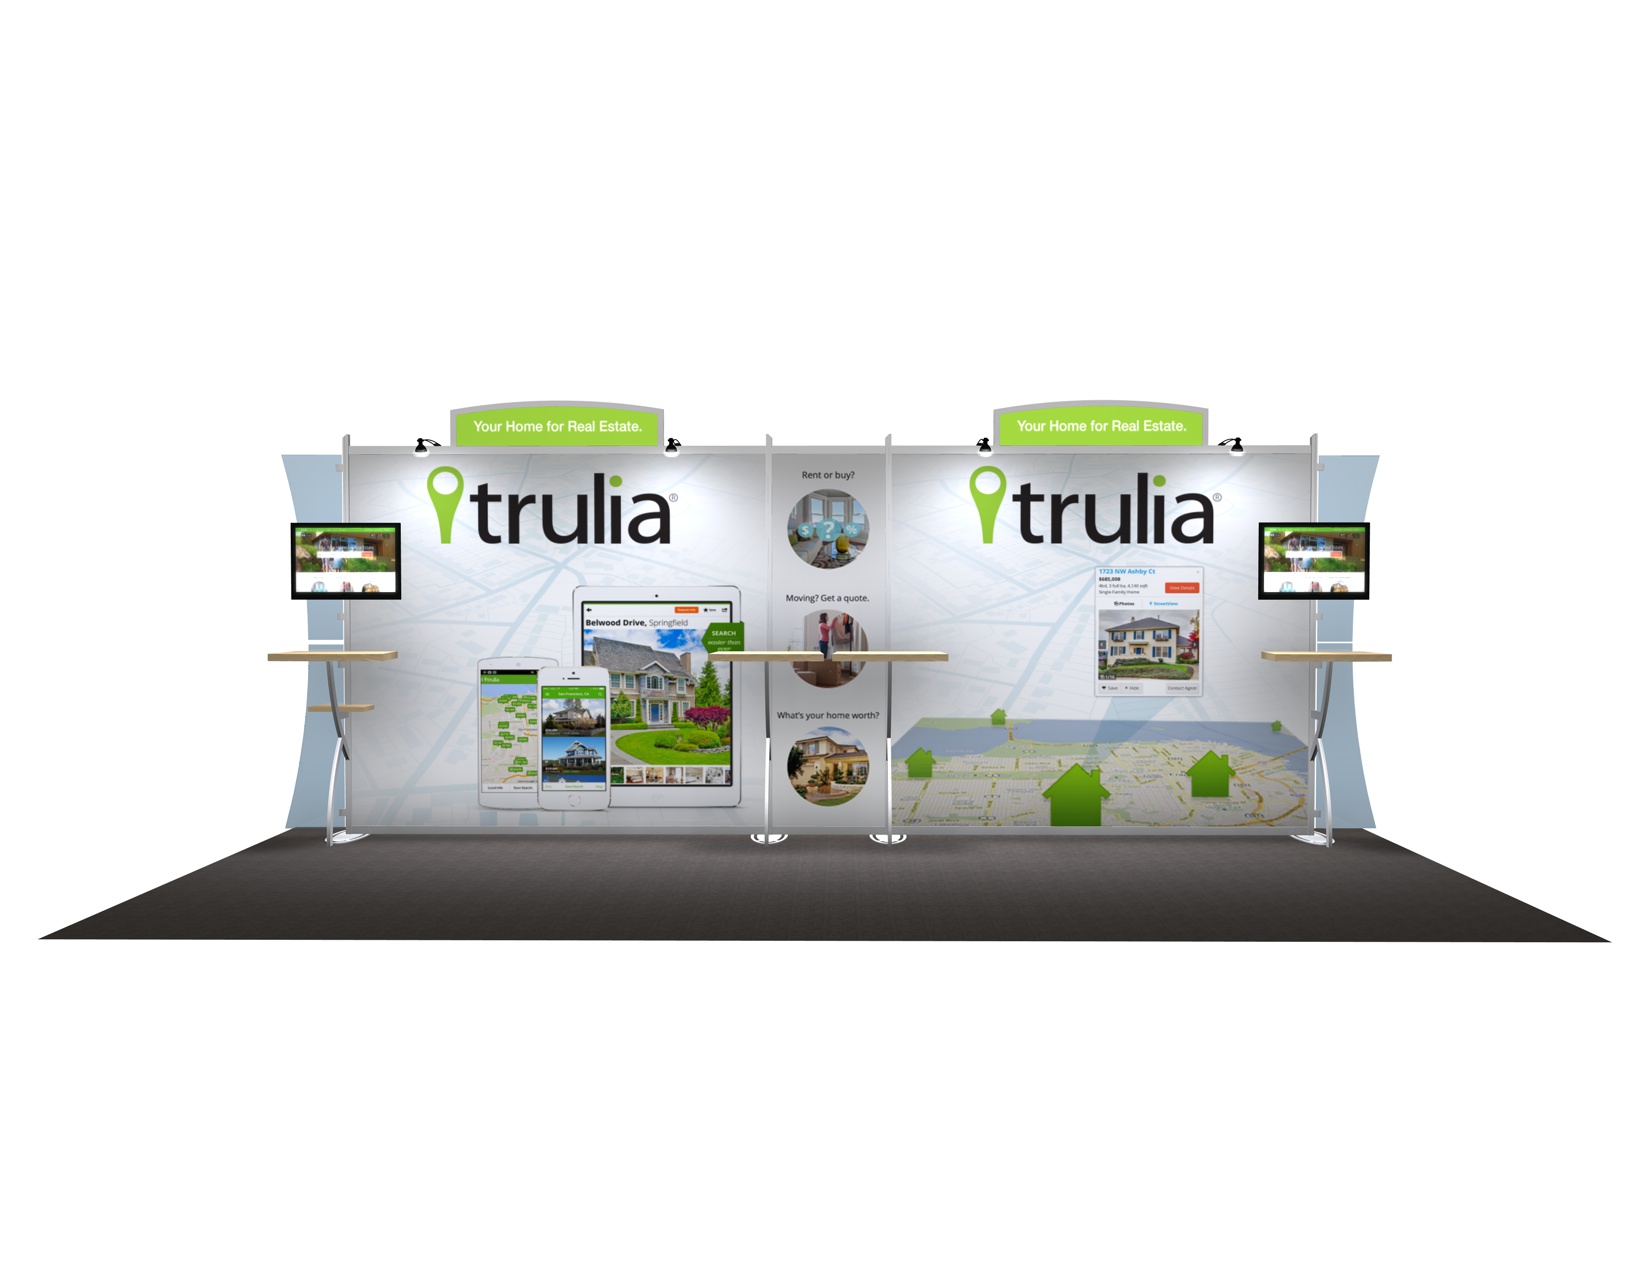 10x20 Trade Show Booths, Displays, Exhibits & Designs